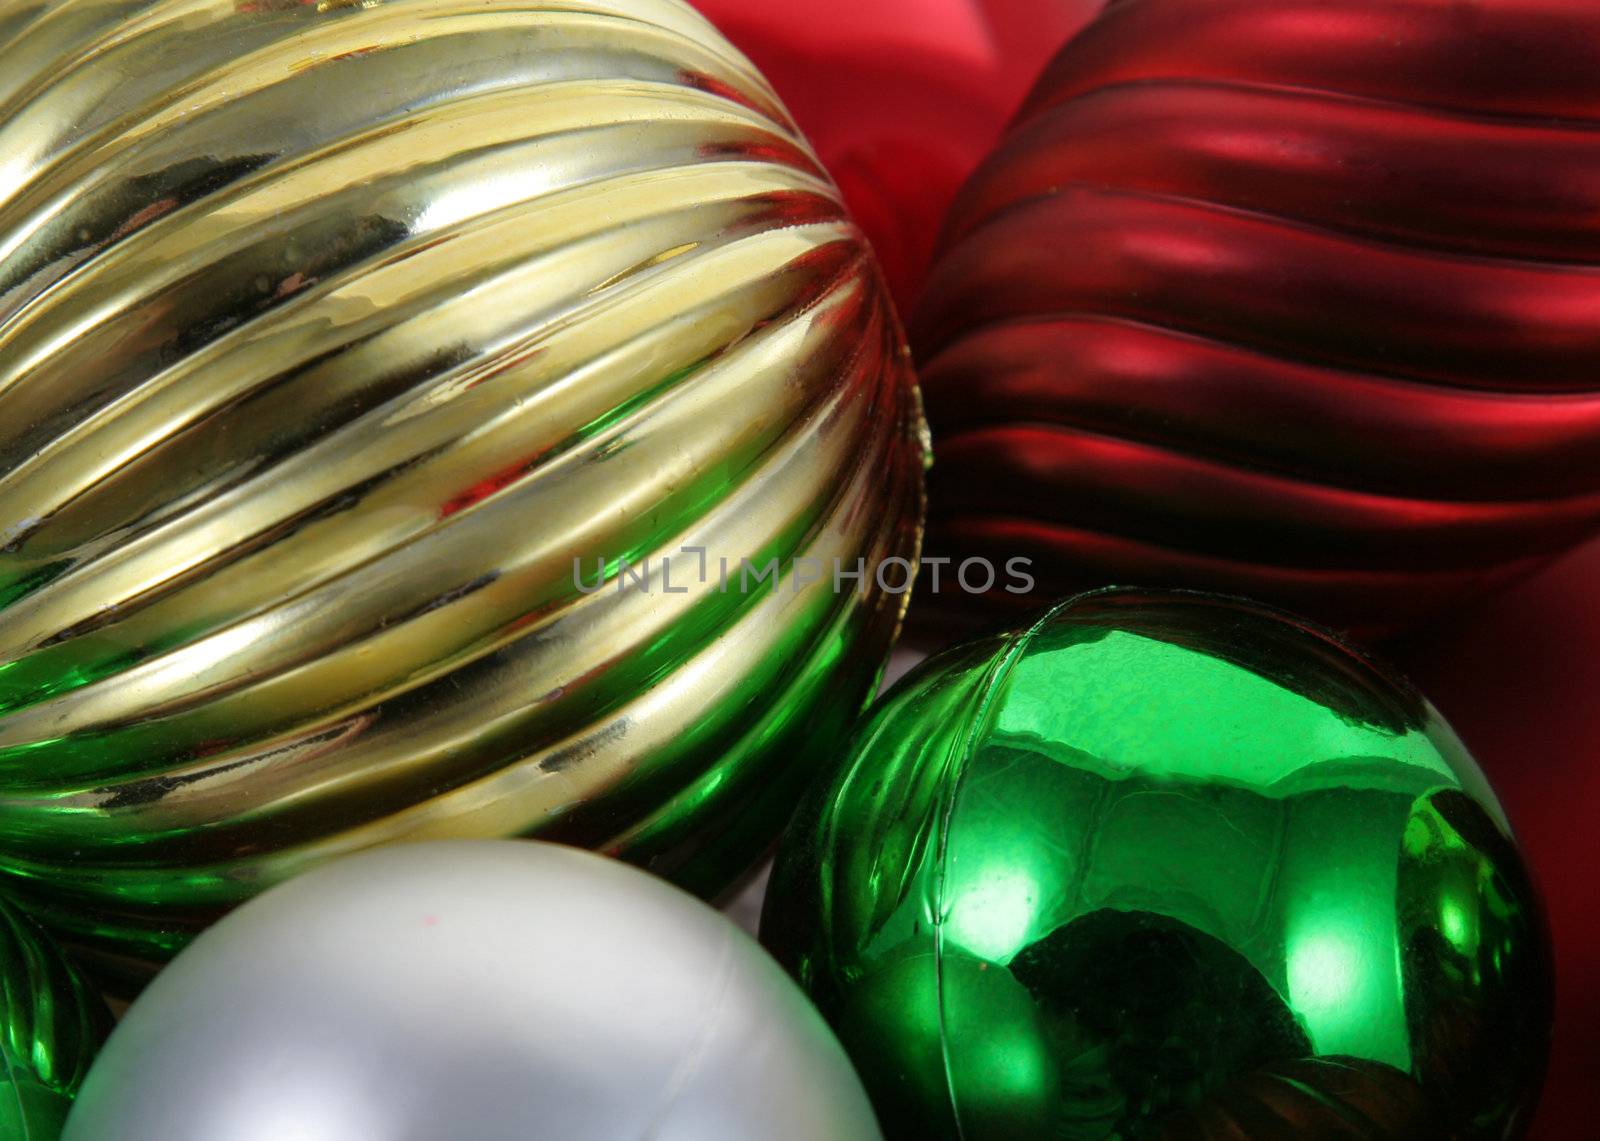 Xmas Bauble Bunch
 by ca2hill